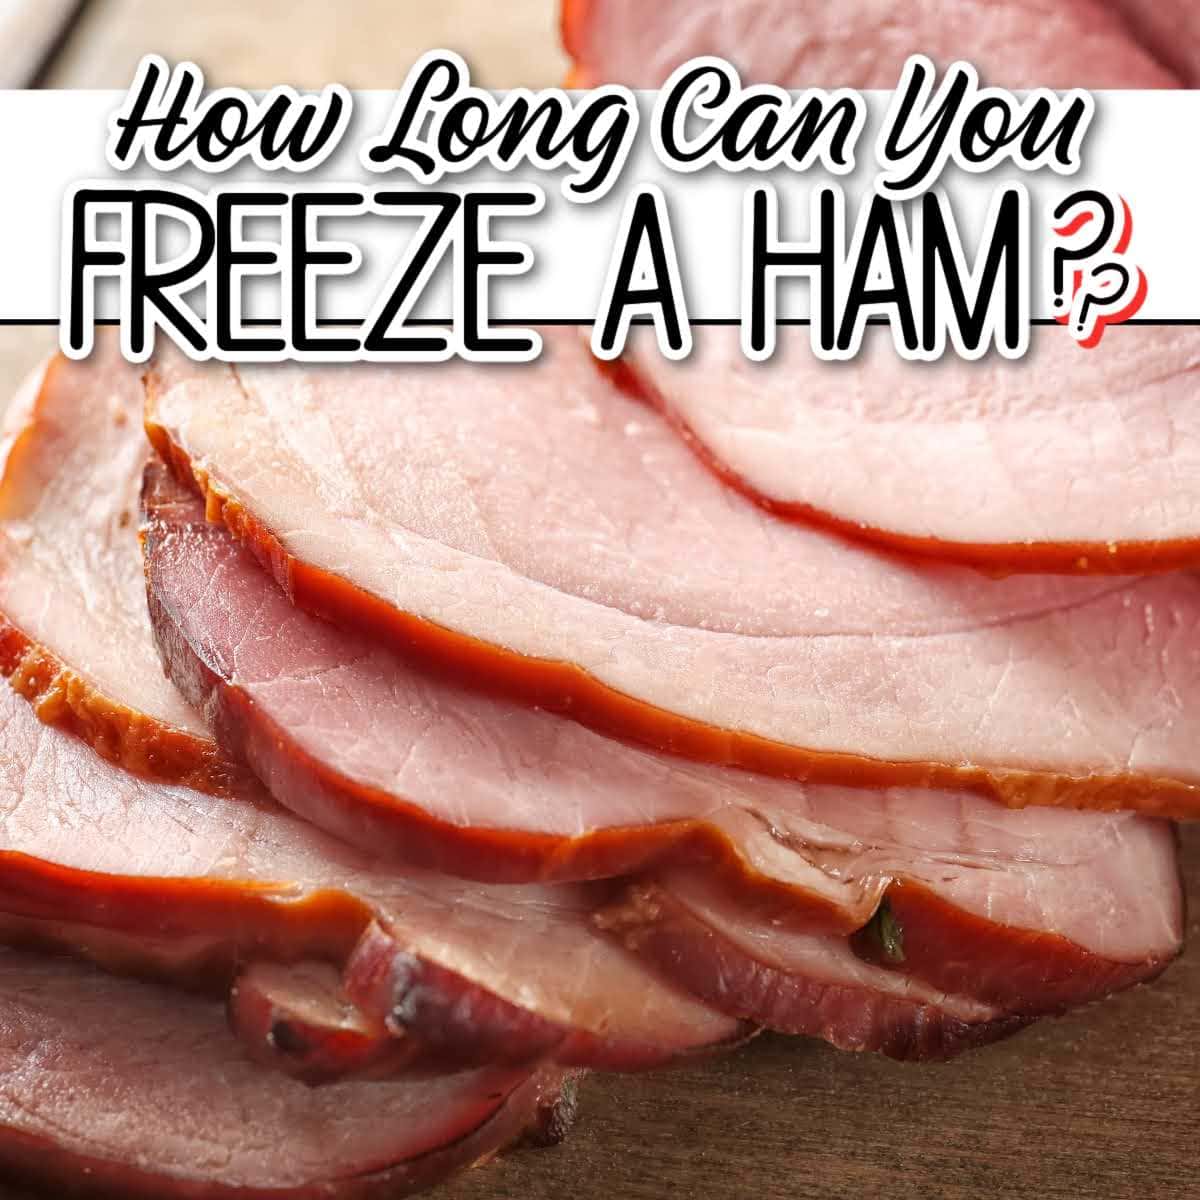 closeup view of slices of honey baked ham on wooden board with text overlay.